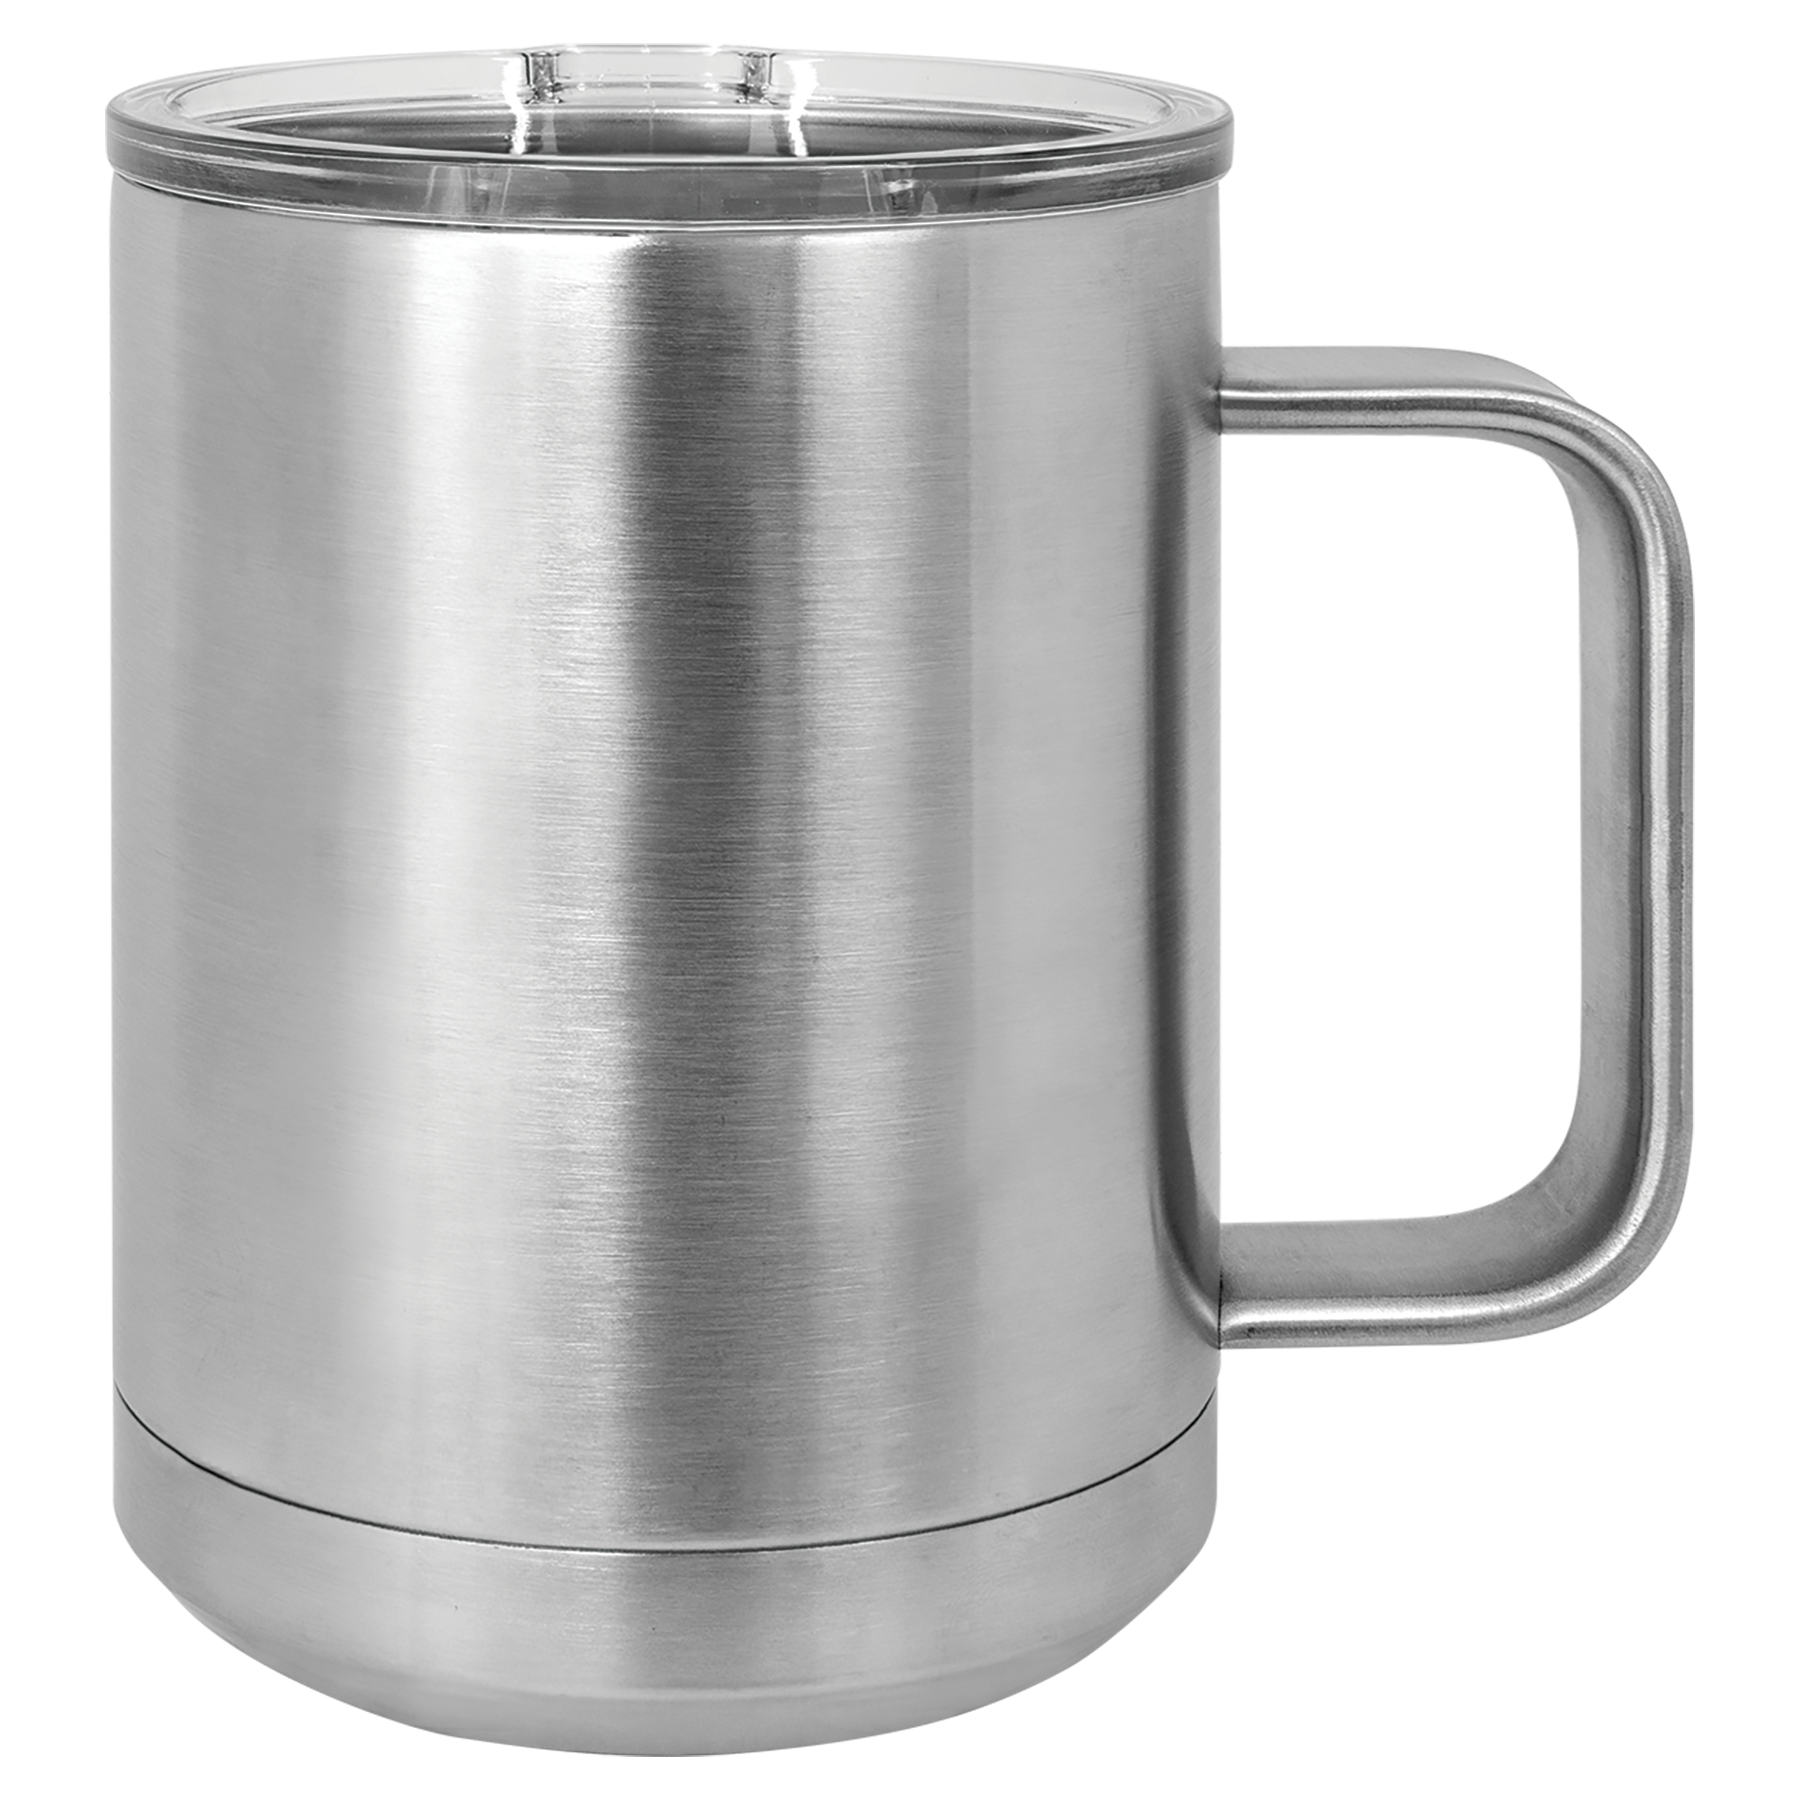 Stainless Steel 15oz Coffee Mug -One Free Engraving  -Fits most Cup Holders  -Double-wall Vacuum Insulated  -Made from 18/8 Gauge Stainless Steel (Type 304 Food Grade)  -Lid is BPA Free (Hand Wash Only)  -Not recommended for Dishwasher  -Works with Cold and Hot Drinks  -18 Color Options  -Perfect for Personalized Gifts, Awards, Incentives, Swag & Fundraisers